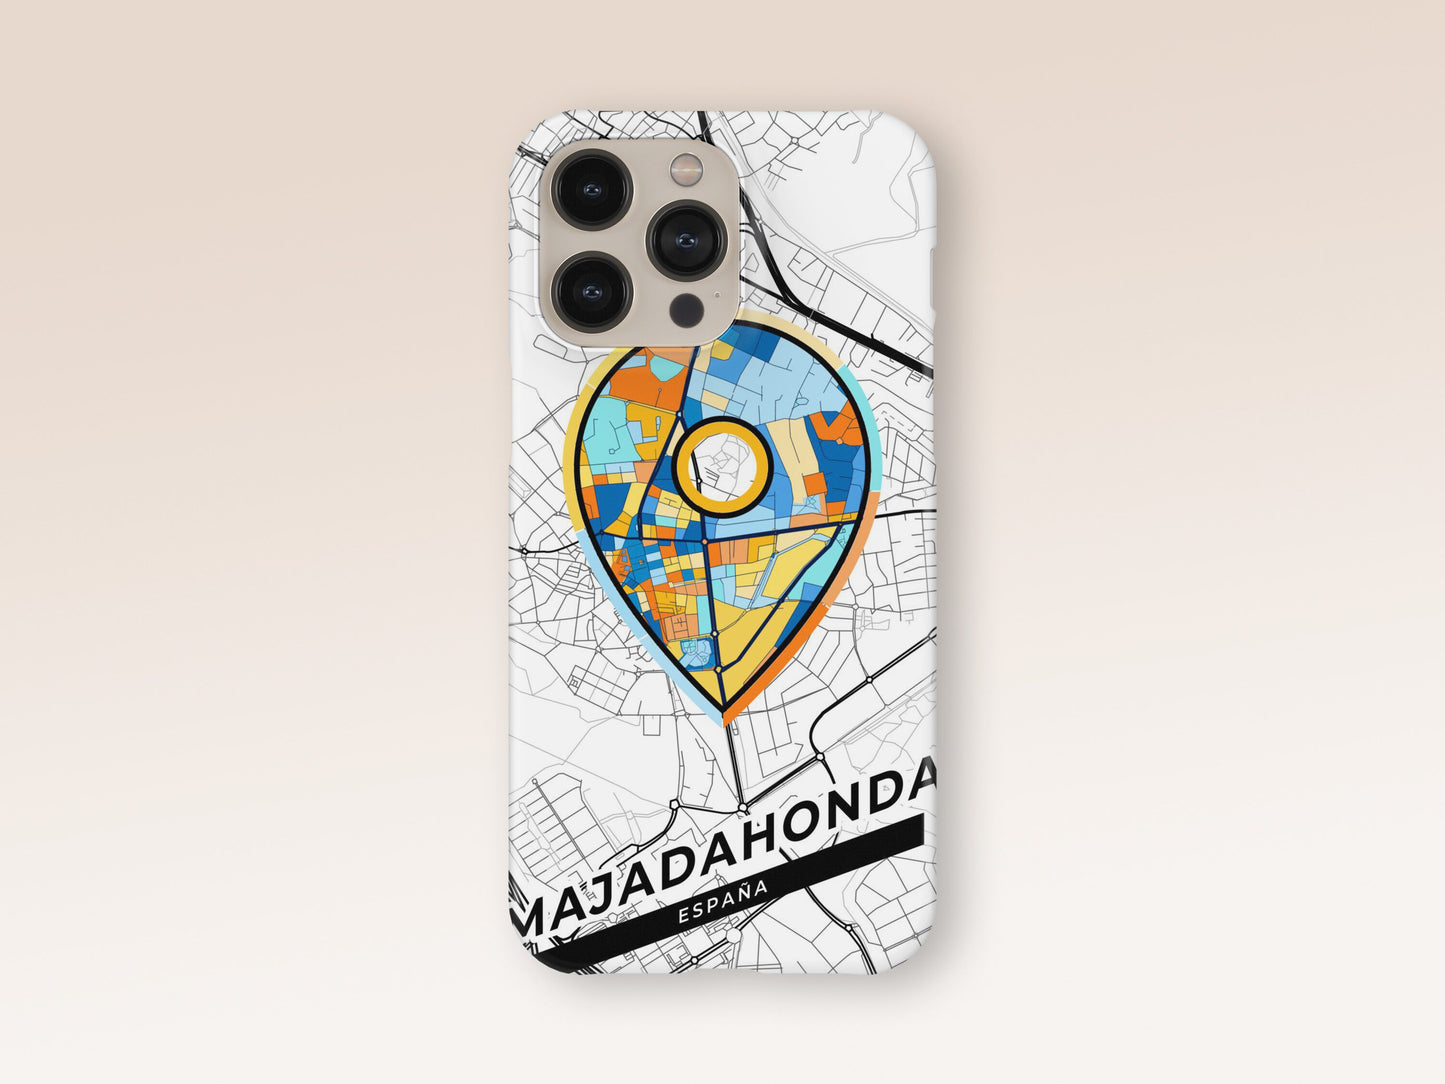 Majadahonda Spain slim phone case with colorful icon. Birthday, wedding or housewarming gift. Couple match cases. 1